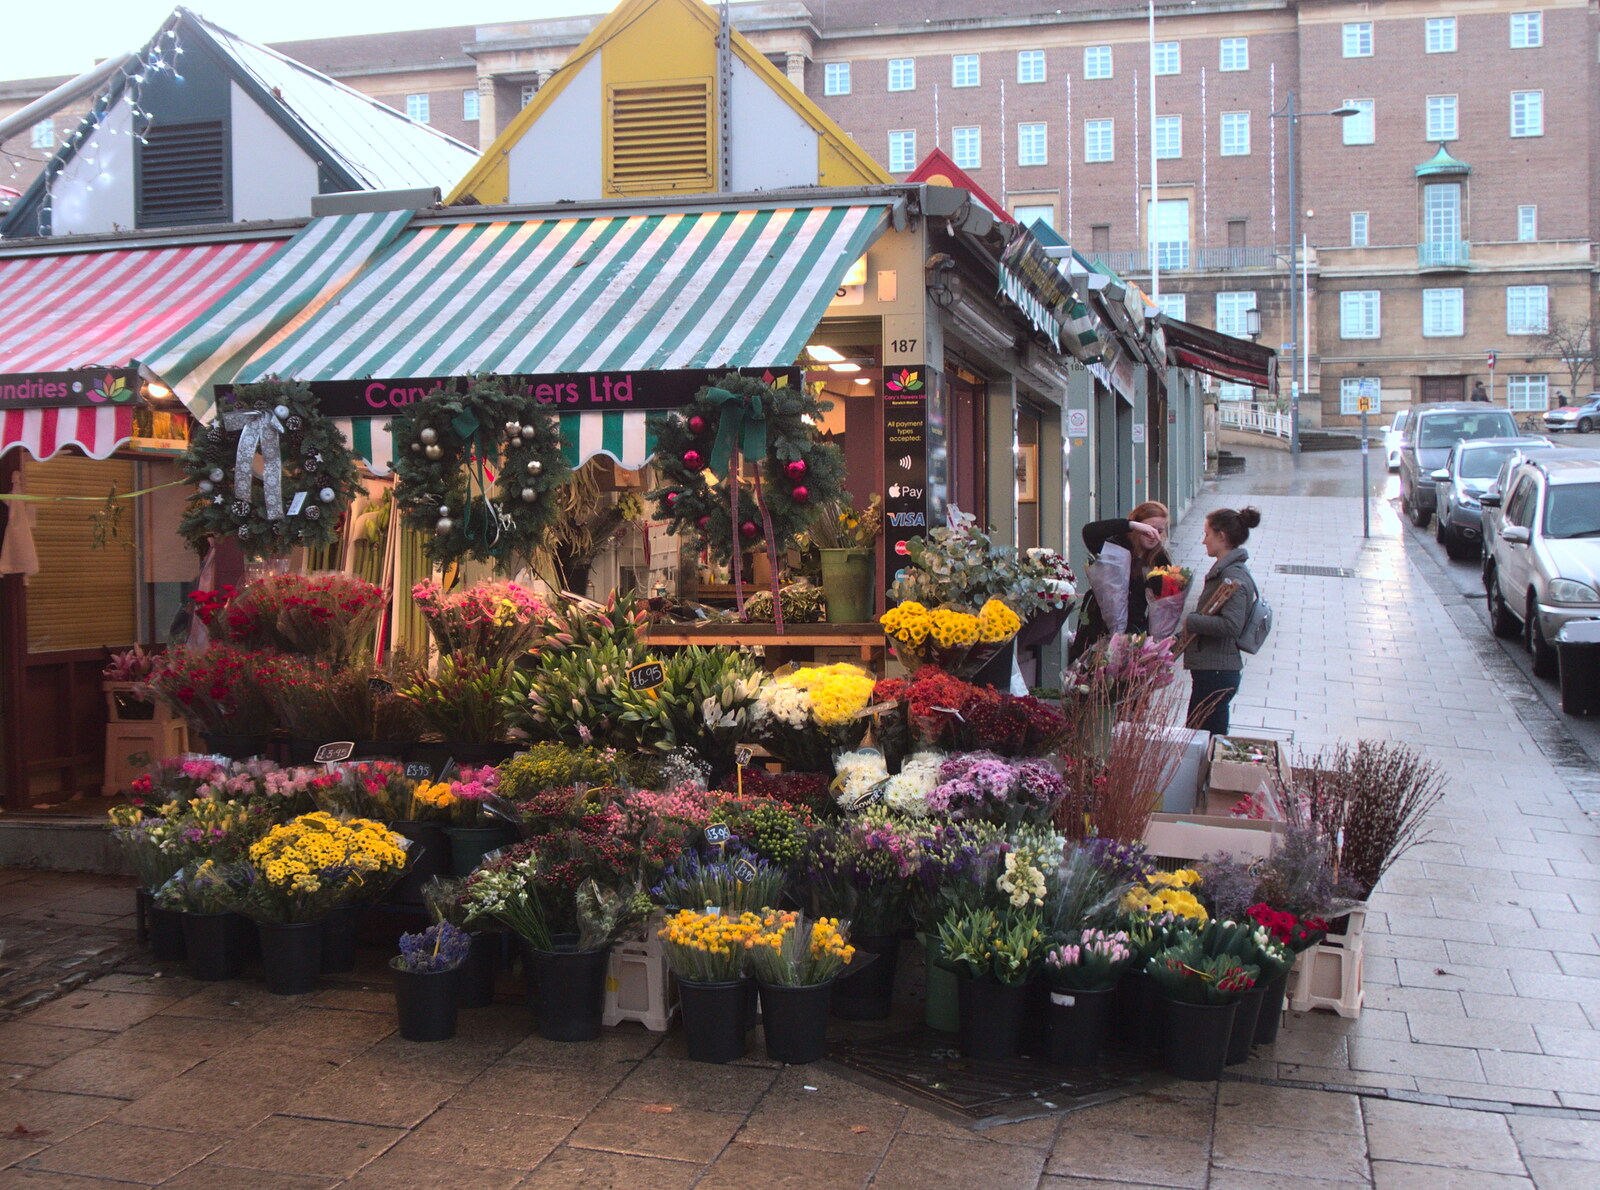 Cary's flower stall, which has been there for ever from A Spot of Christmas Shopping, Norwich, Norfolk - 16th December 2018